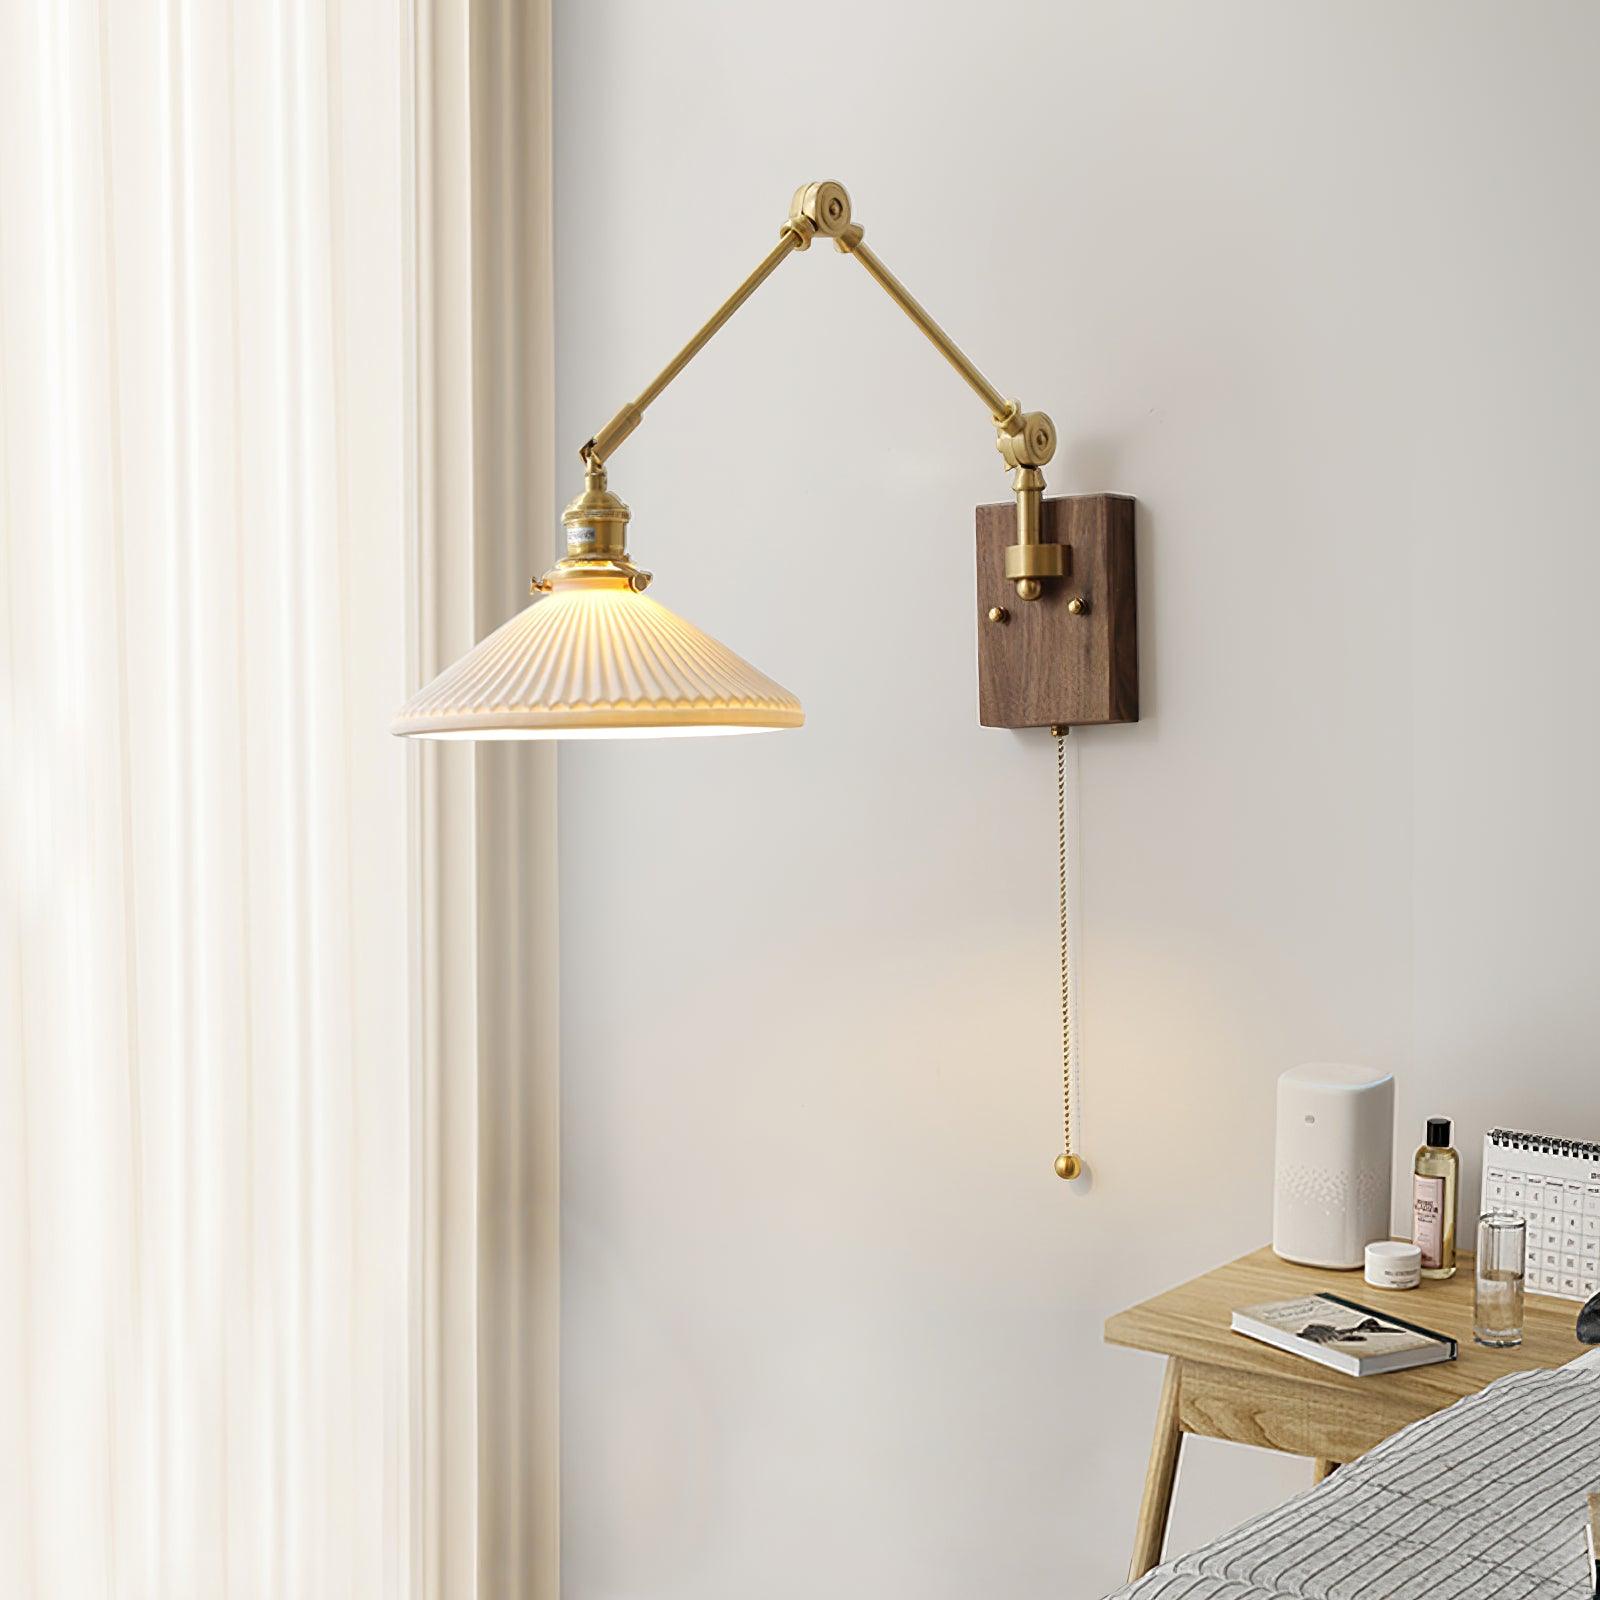 Vintage Home Decor Wall Lamp: The Classic Fusion of Brass and Walnut